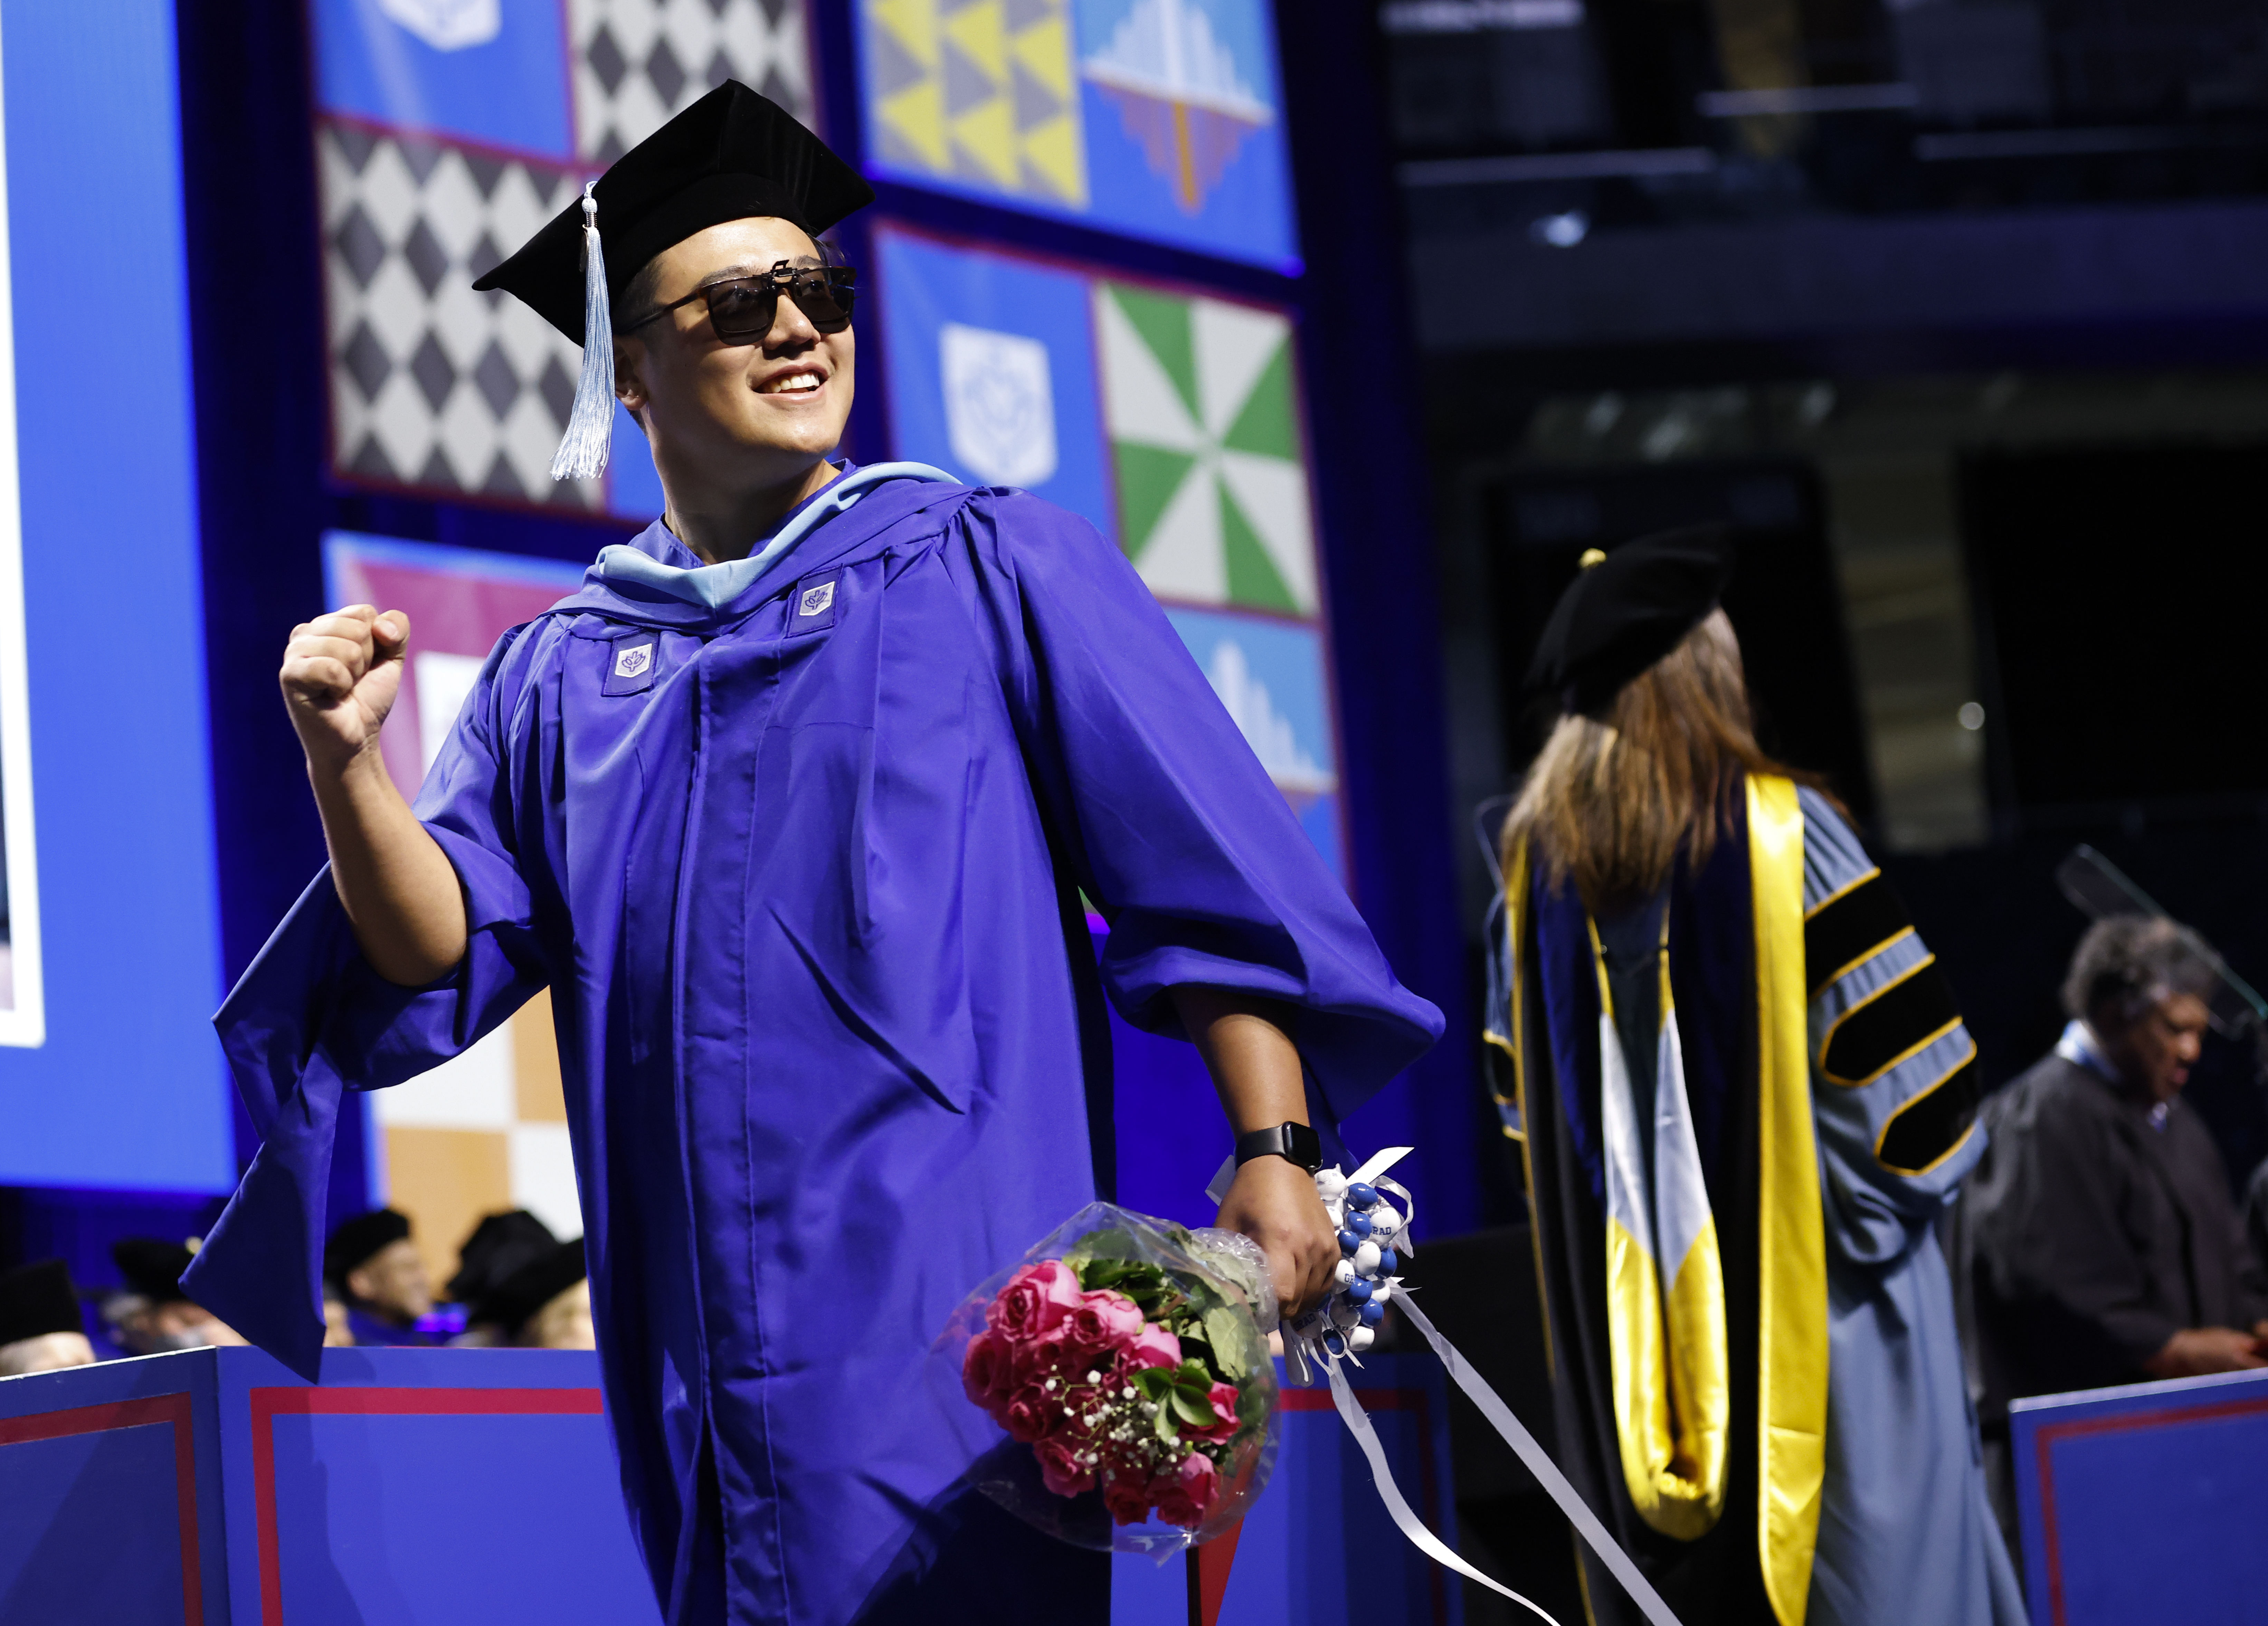 A man in sunglasses crosses the stage